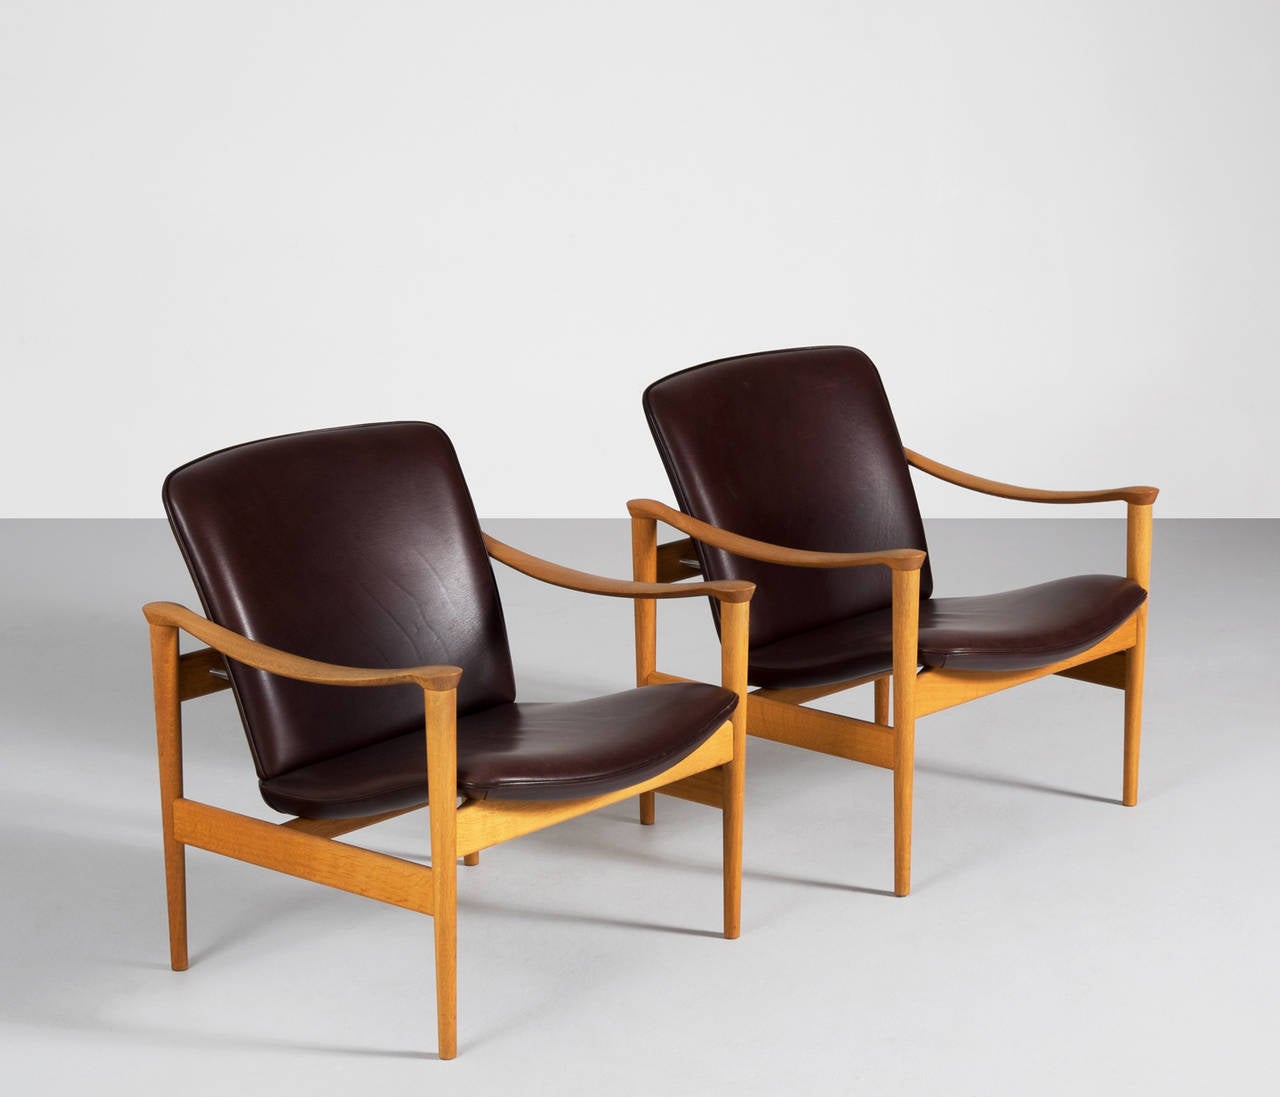 Real nice sculptural lounge chairs in oak designed by Frederik Kayser, Norway, 1960s. The chairs are upholstered in dark brown leather with a fabulous patina.

The shape of these chairs are very elegantly designed, also the comfort is really good